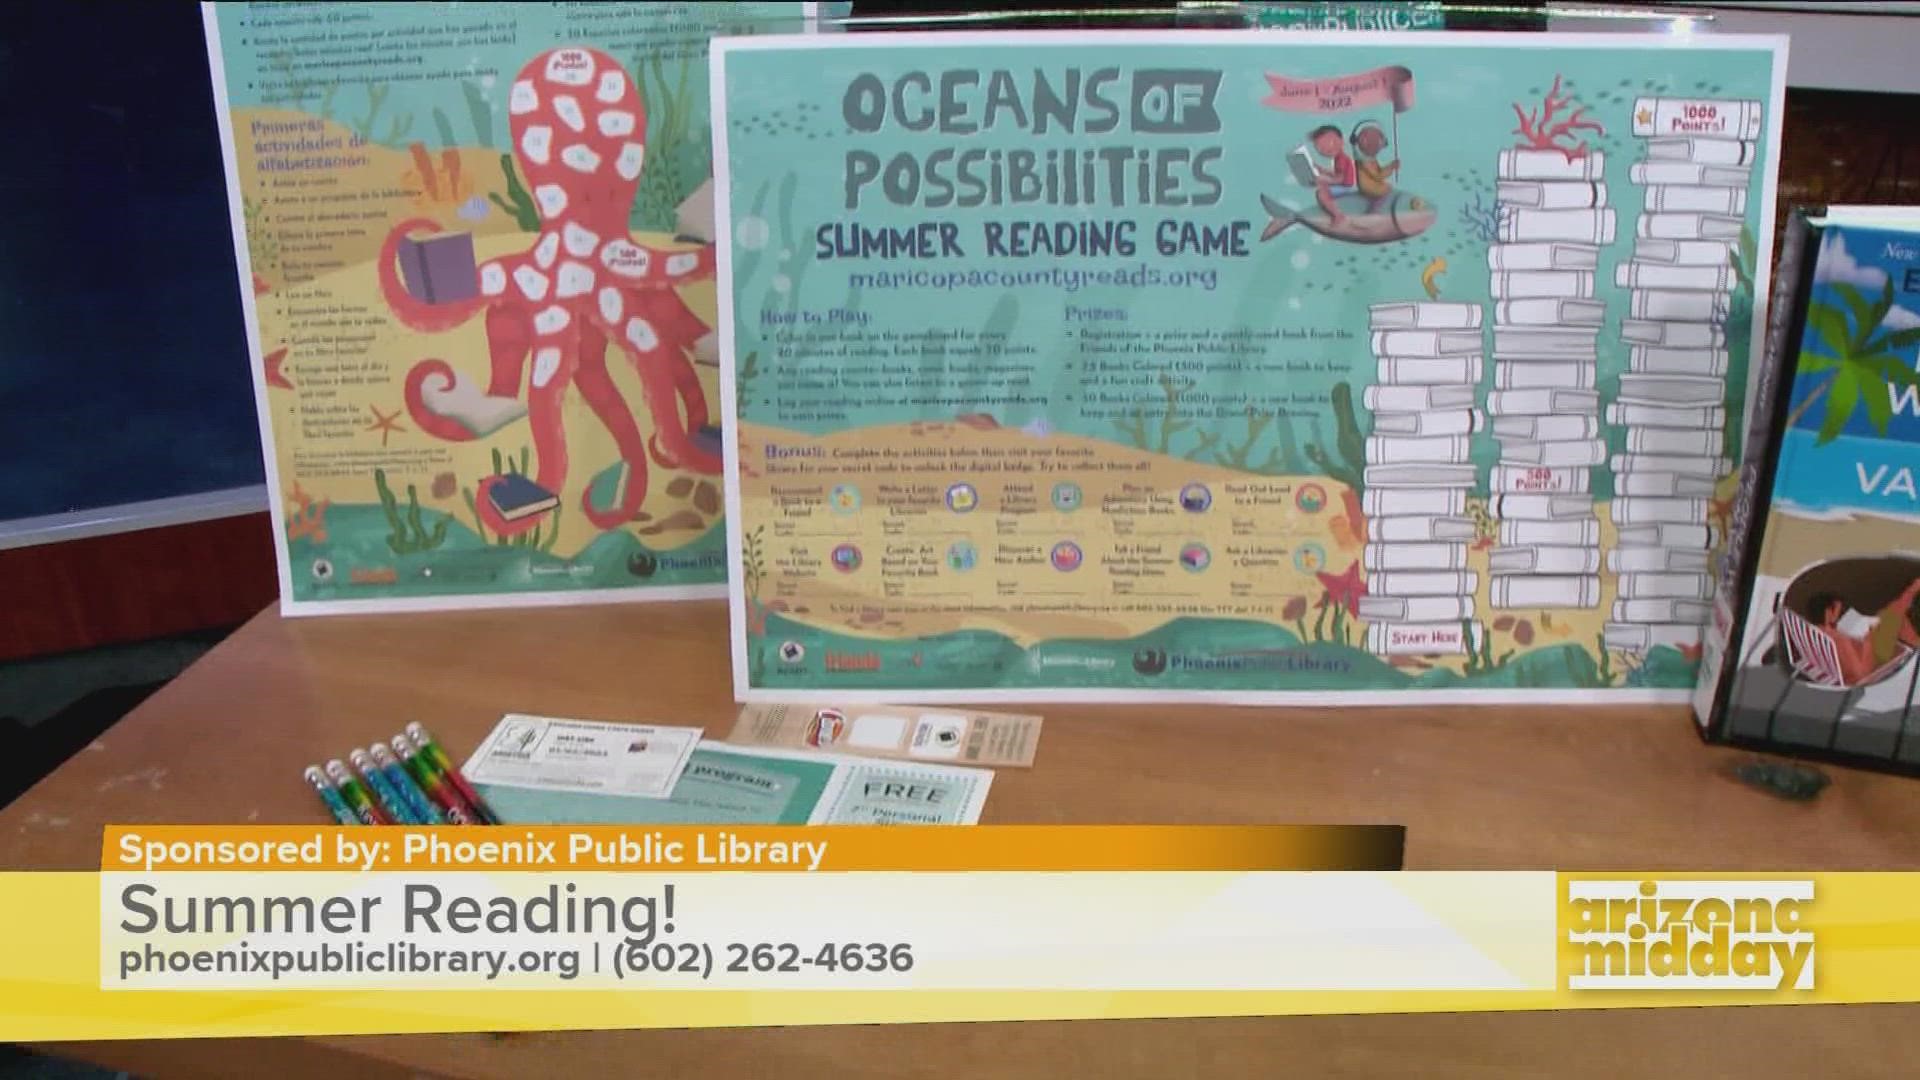 Lee Franklin, from the Phoenix Public Library, has her pick for top books to read plus how to get your kids in the Summer Reading Challenge.